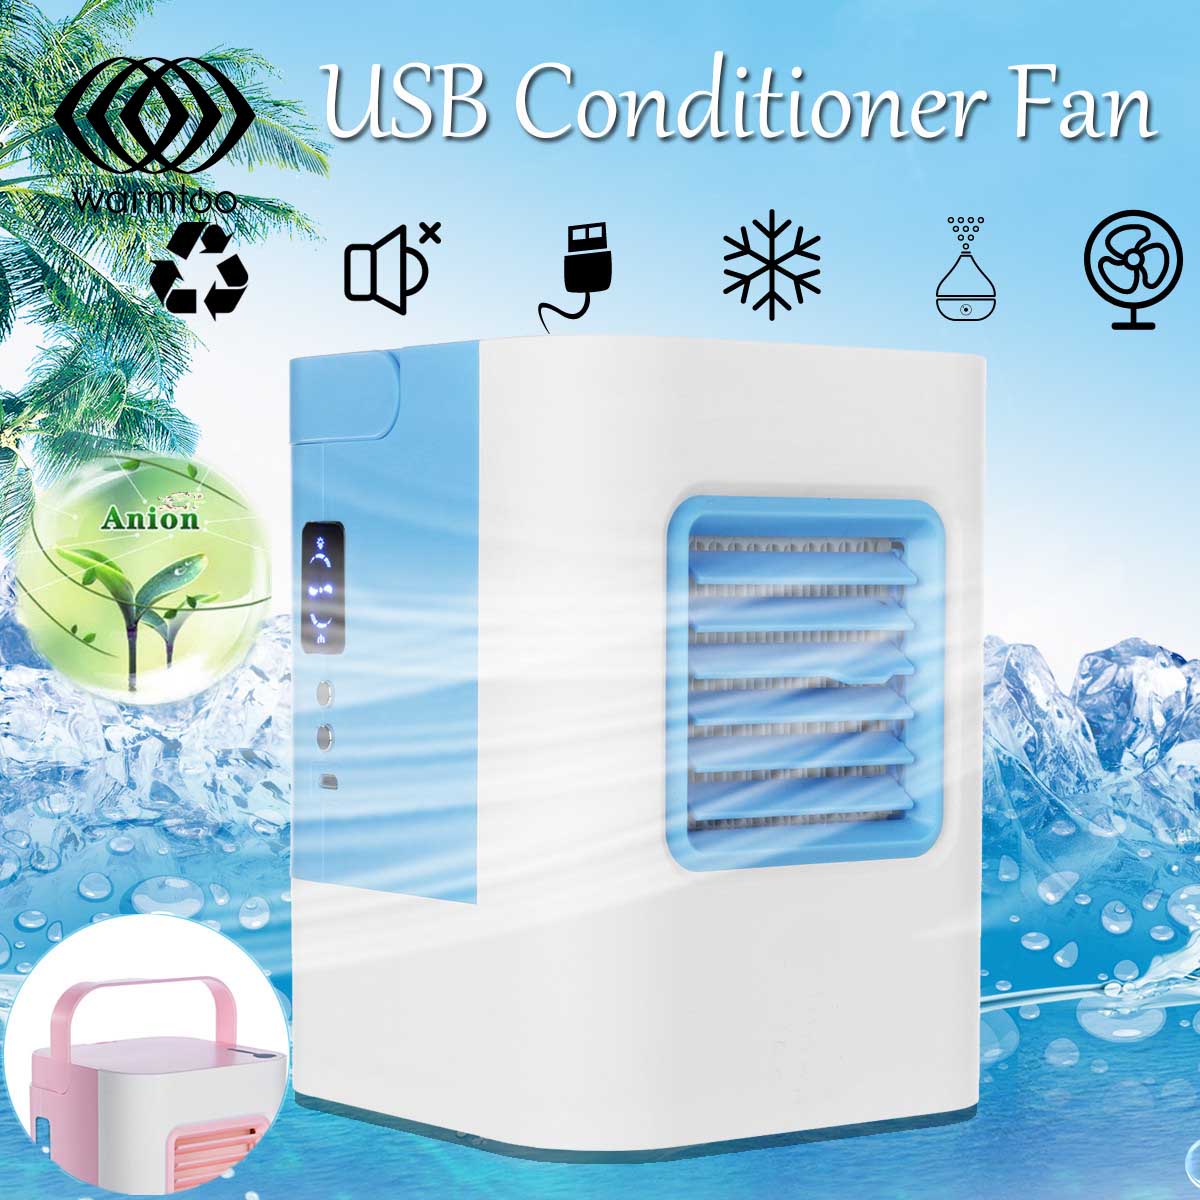 USB-Conditioner-Fan-Refrigeration-Air-Personal-Space-Cooler-Portable-Air-Conditioner-Cooling-Fan-1311326-1